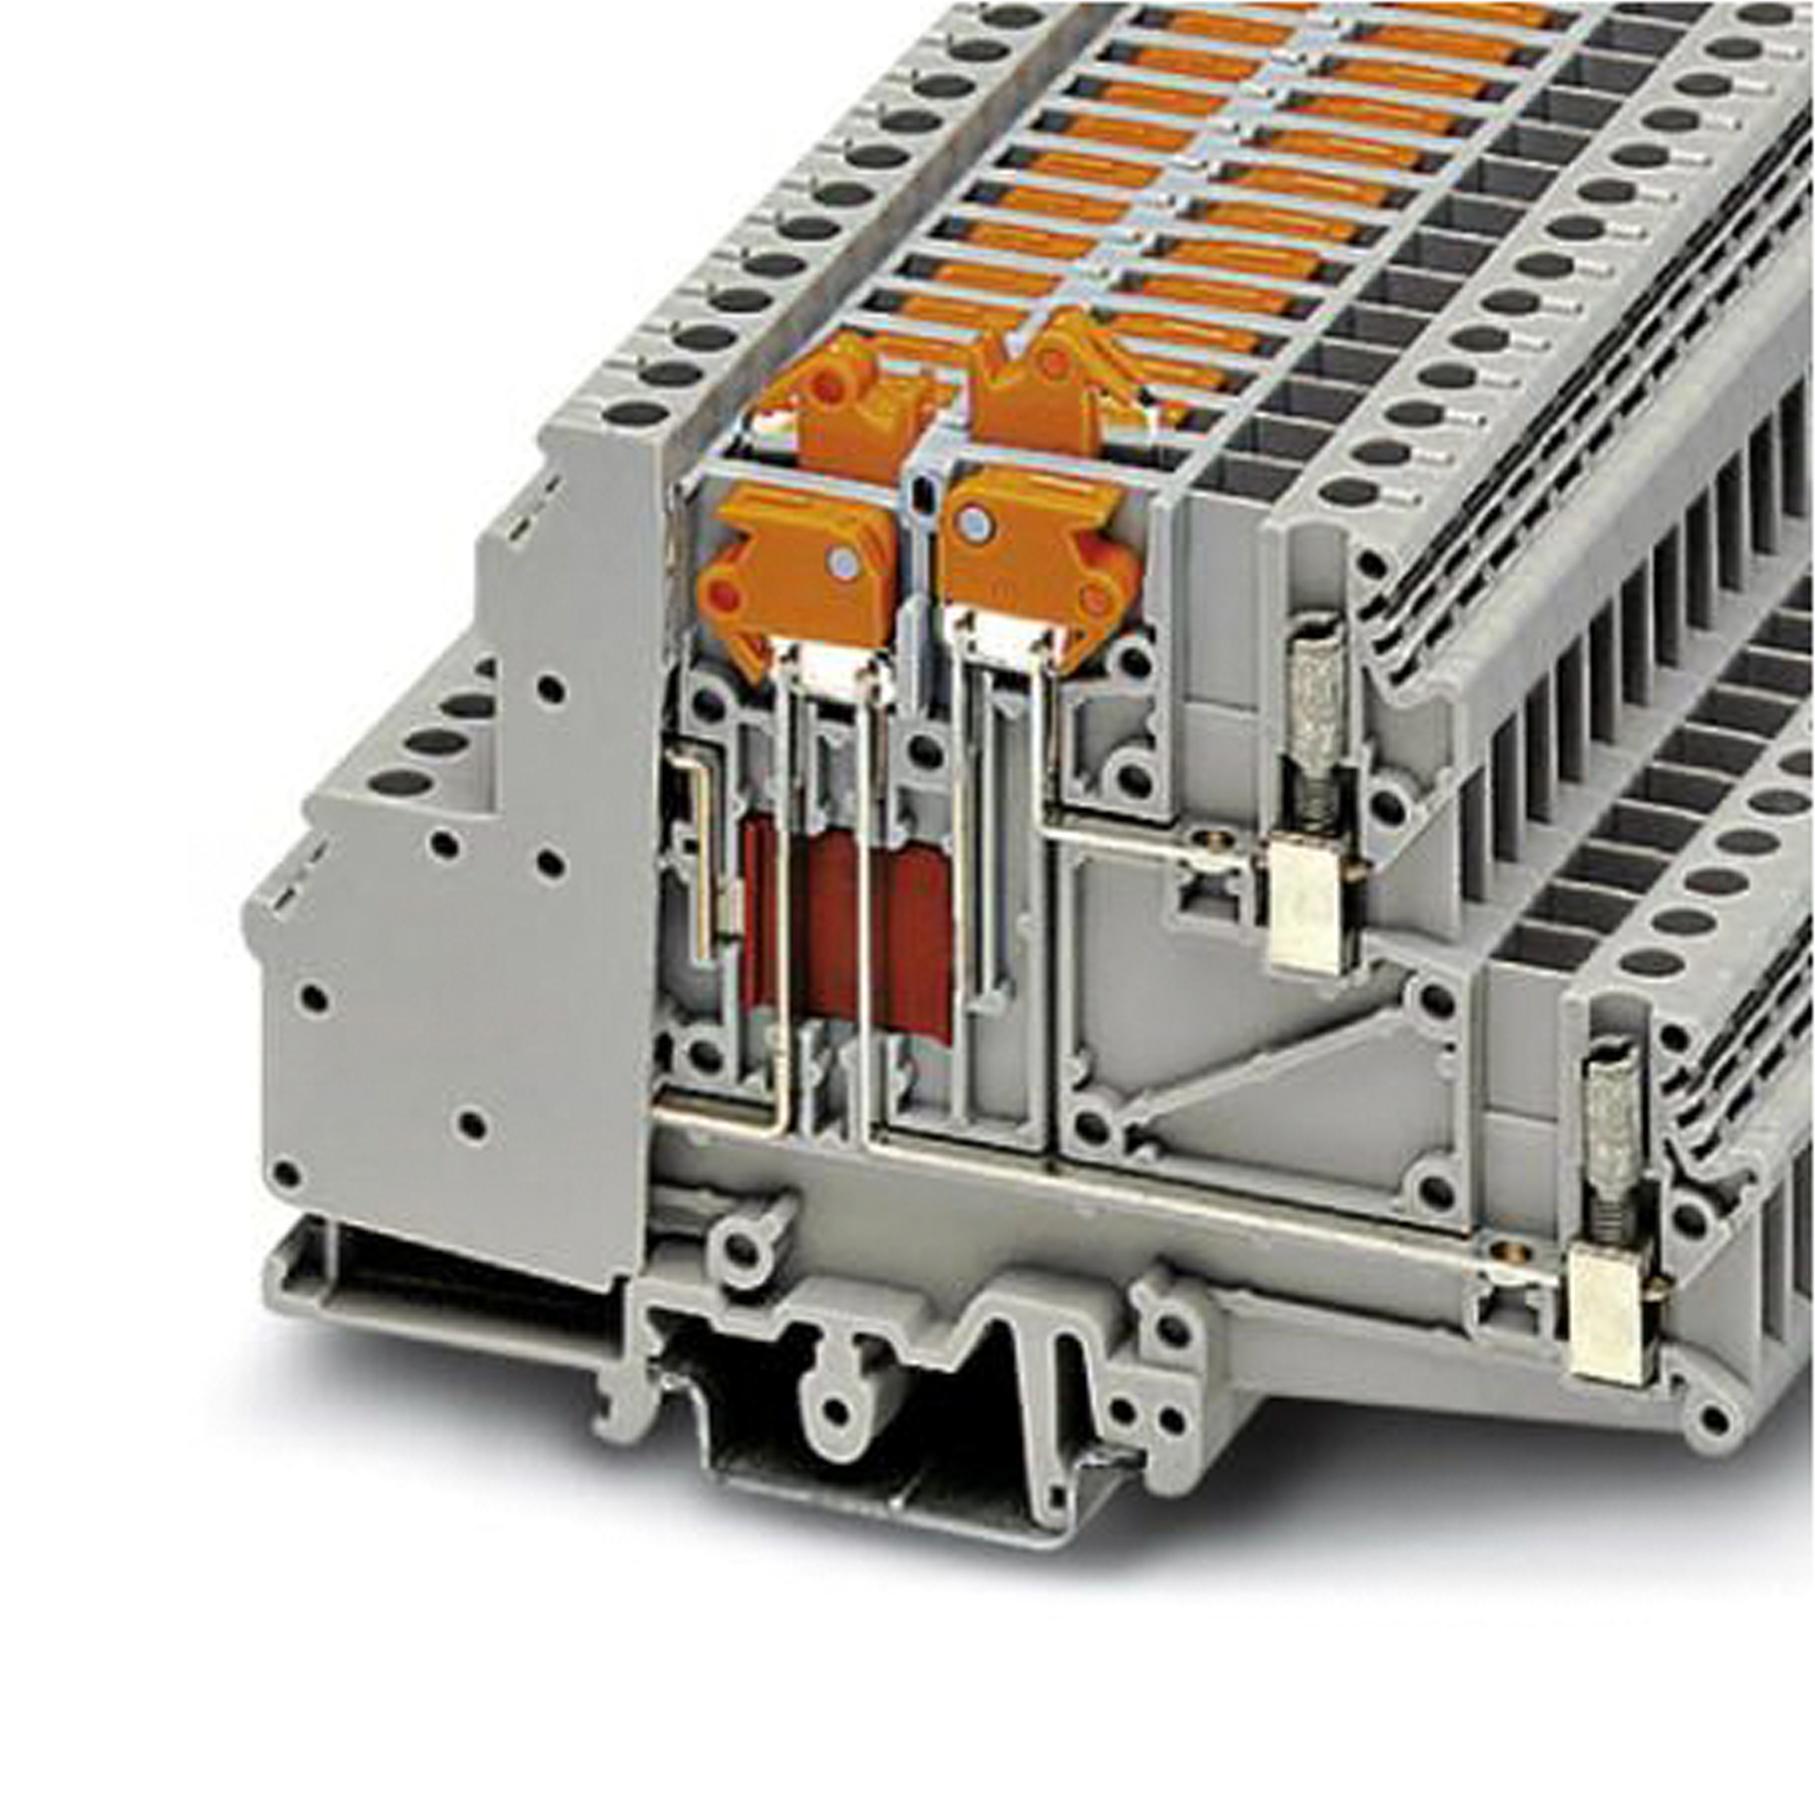 UDMTKB 5-P/P DIN RAIL TB, KNIFE DISCONNECT, 4P, 12AWG PHOENIX CONTACT